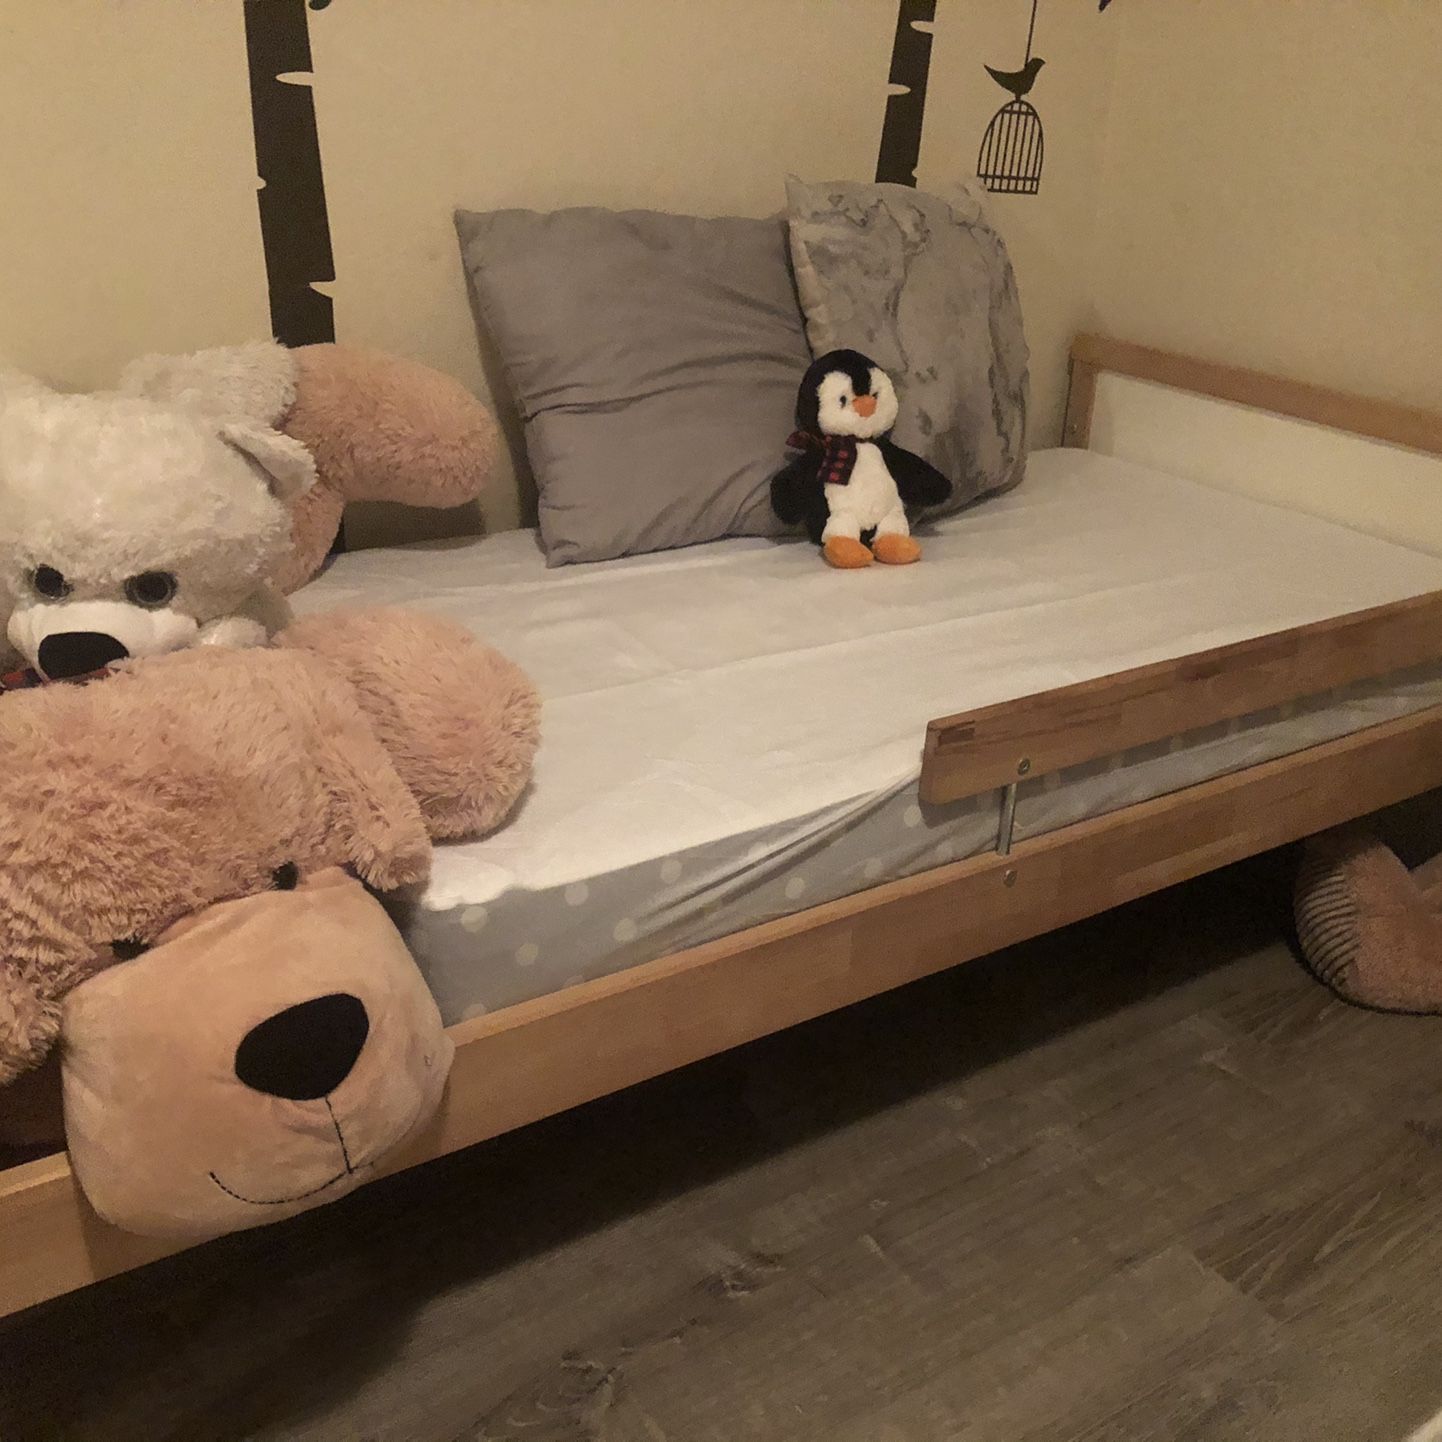 Ikea Twin Bed With Toddler Mattress And New Bed Sheet